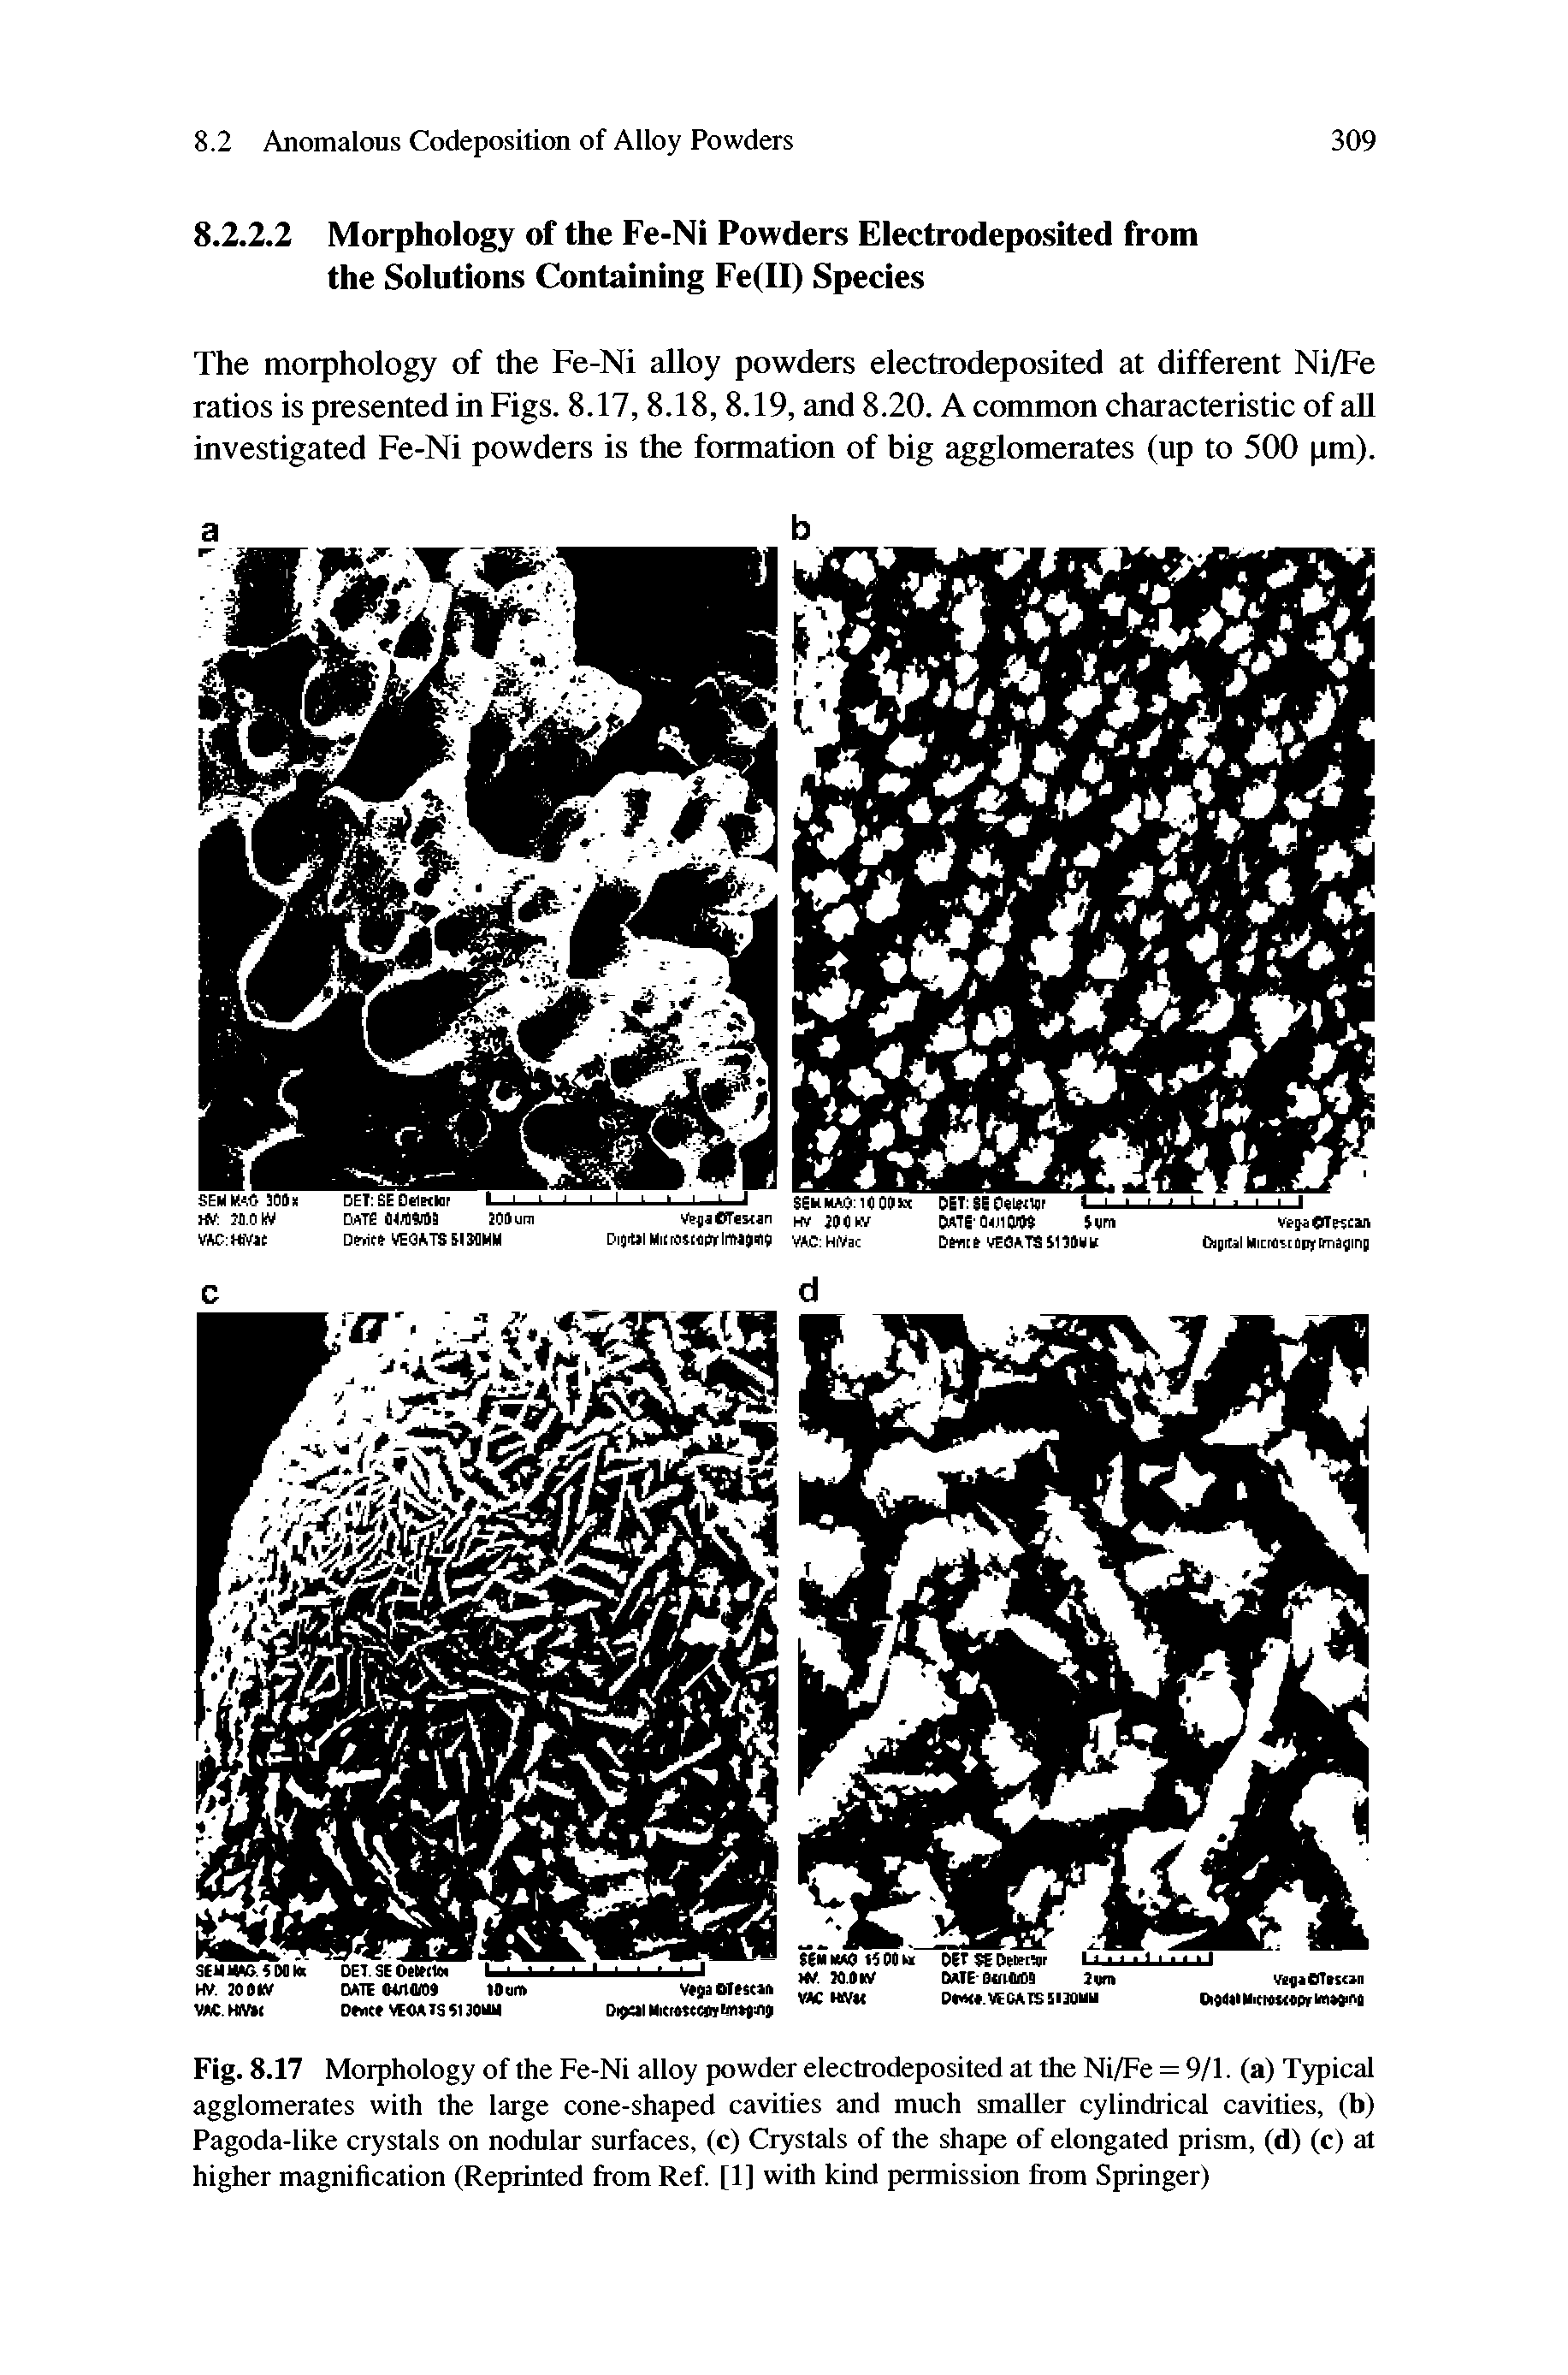 Fig. 8.17 Morphology of the Fe-Ni alloy powder electrodeposited at the Ni/Fe = 9/1. (a) Typical agglomerates with the large cone-shaped cavities and much smaller cylindrical cavities, (b) Pagoda-like crystals on nodular surfaces, (c) Crystals of the shape of elongated prism, (d) (c) at higher magnification (Reprinted from Ref. [1] with kind permission from Springer)...